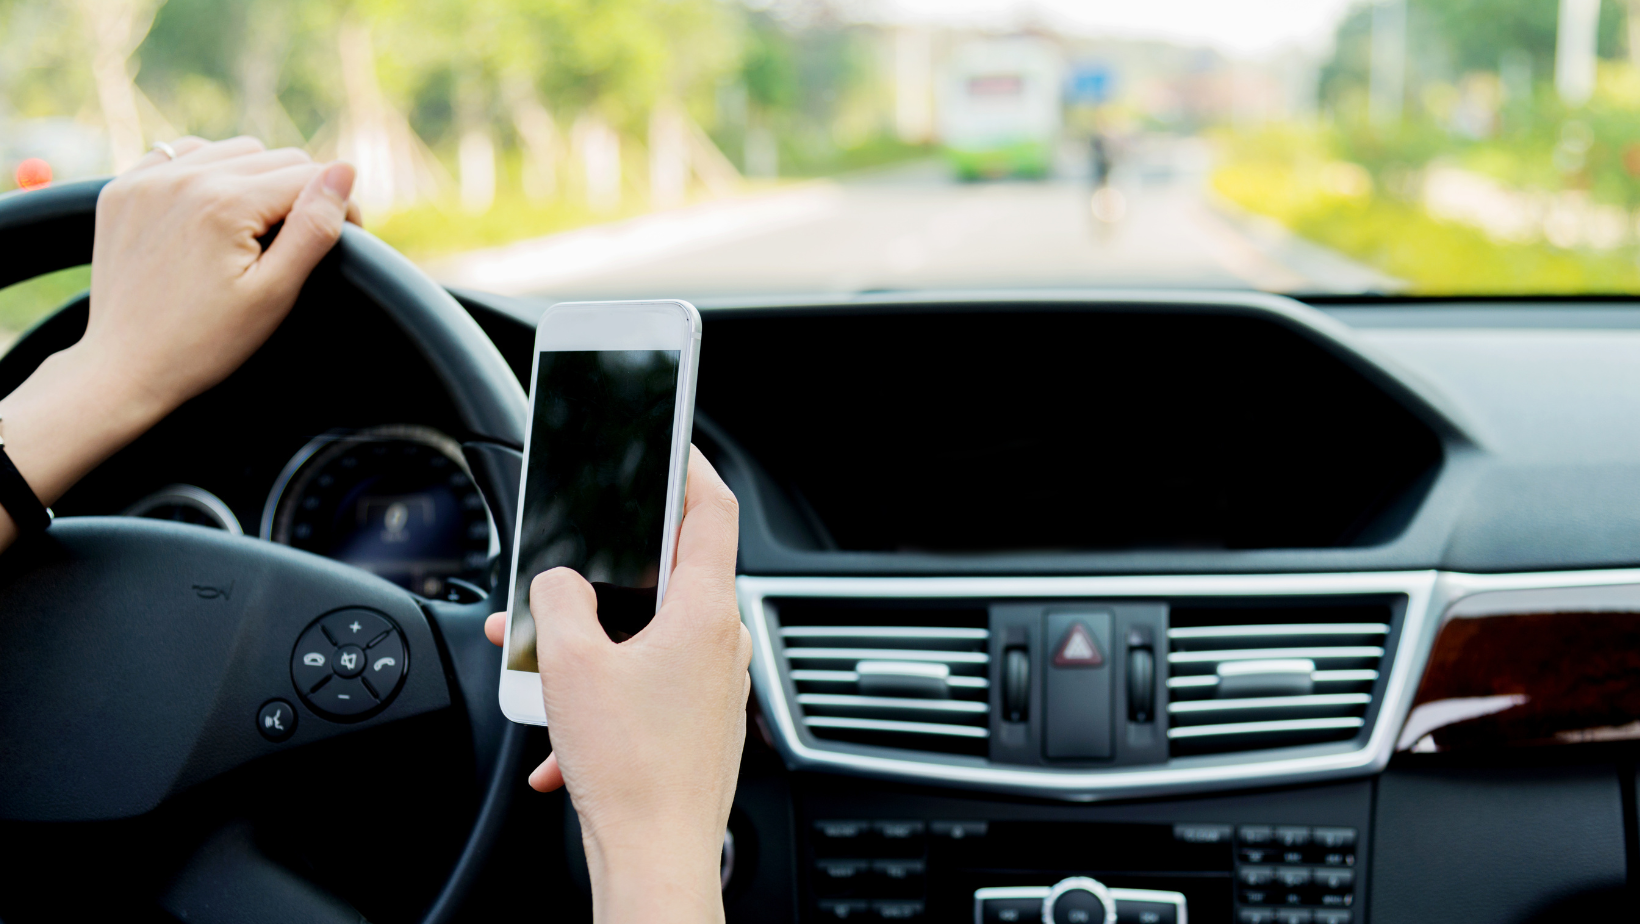 drivers who text spend about 10